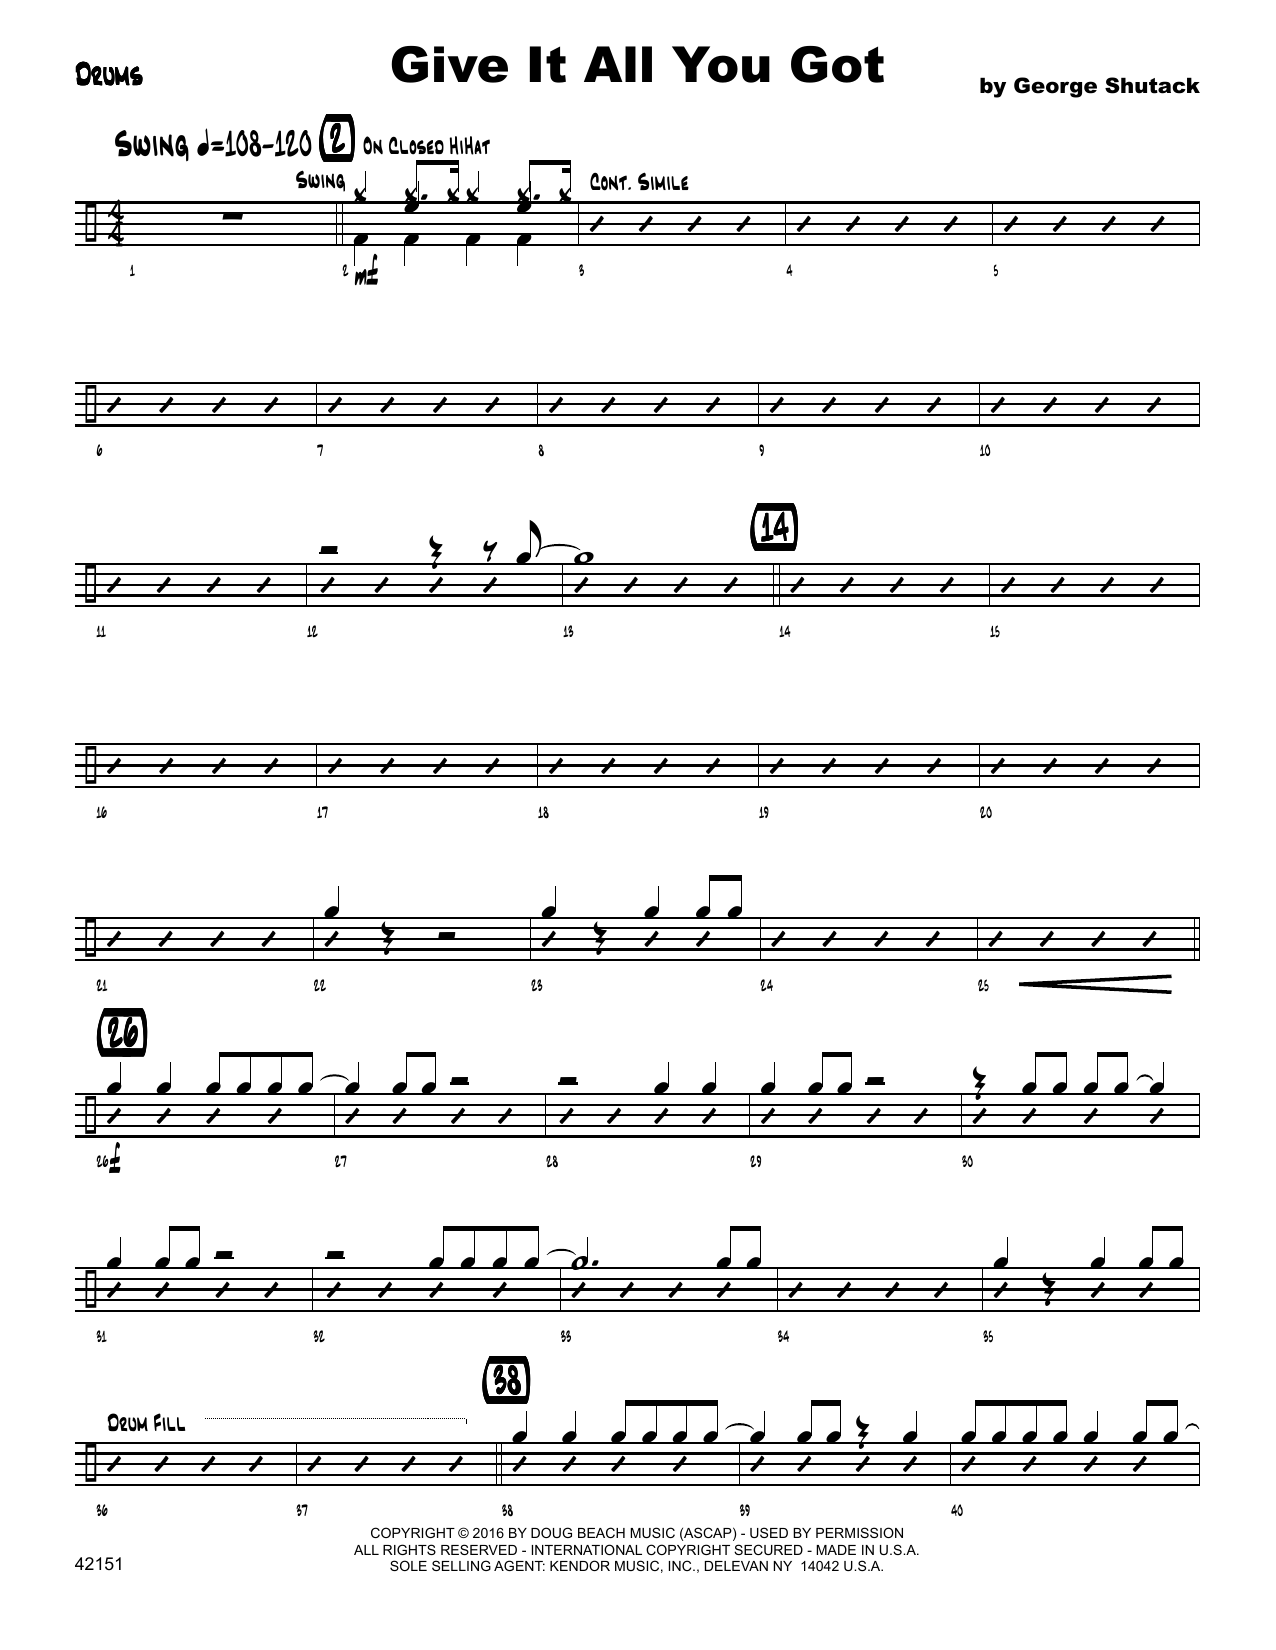 Download George Shutack Give It All You Got - Drum Set Sheet Music